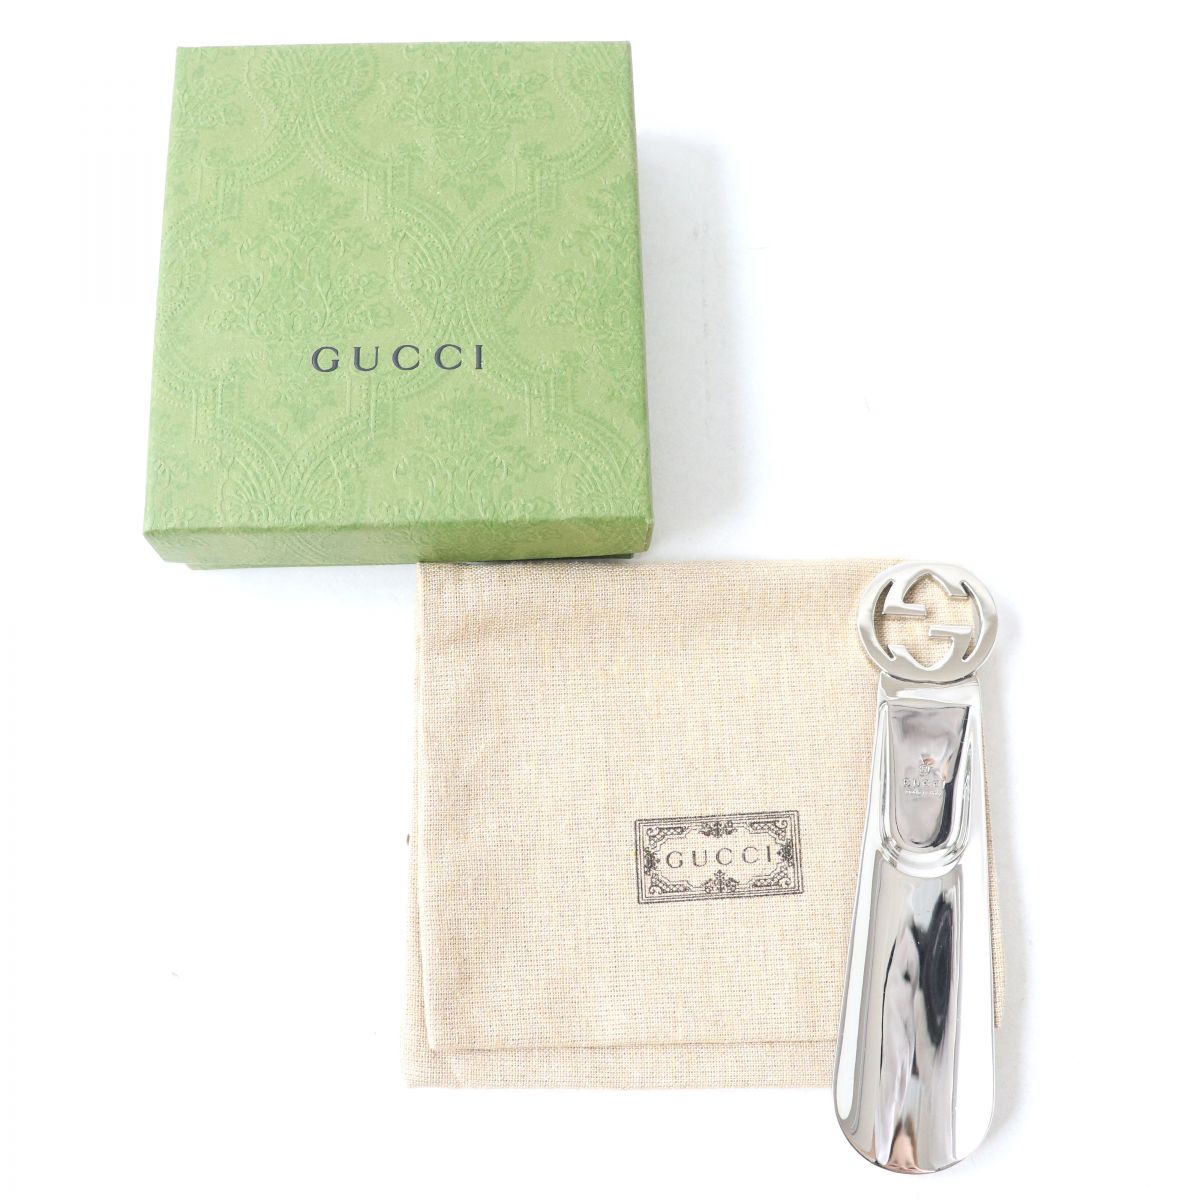  superior article ^ Italy made GUCCI Gucci 189945 Inter locking G metal shoe horn | shoes bela| portable shoes bela silver men's lady's 